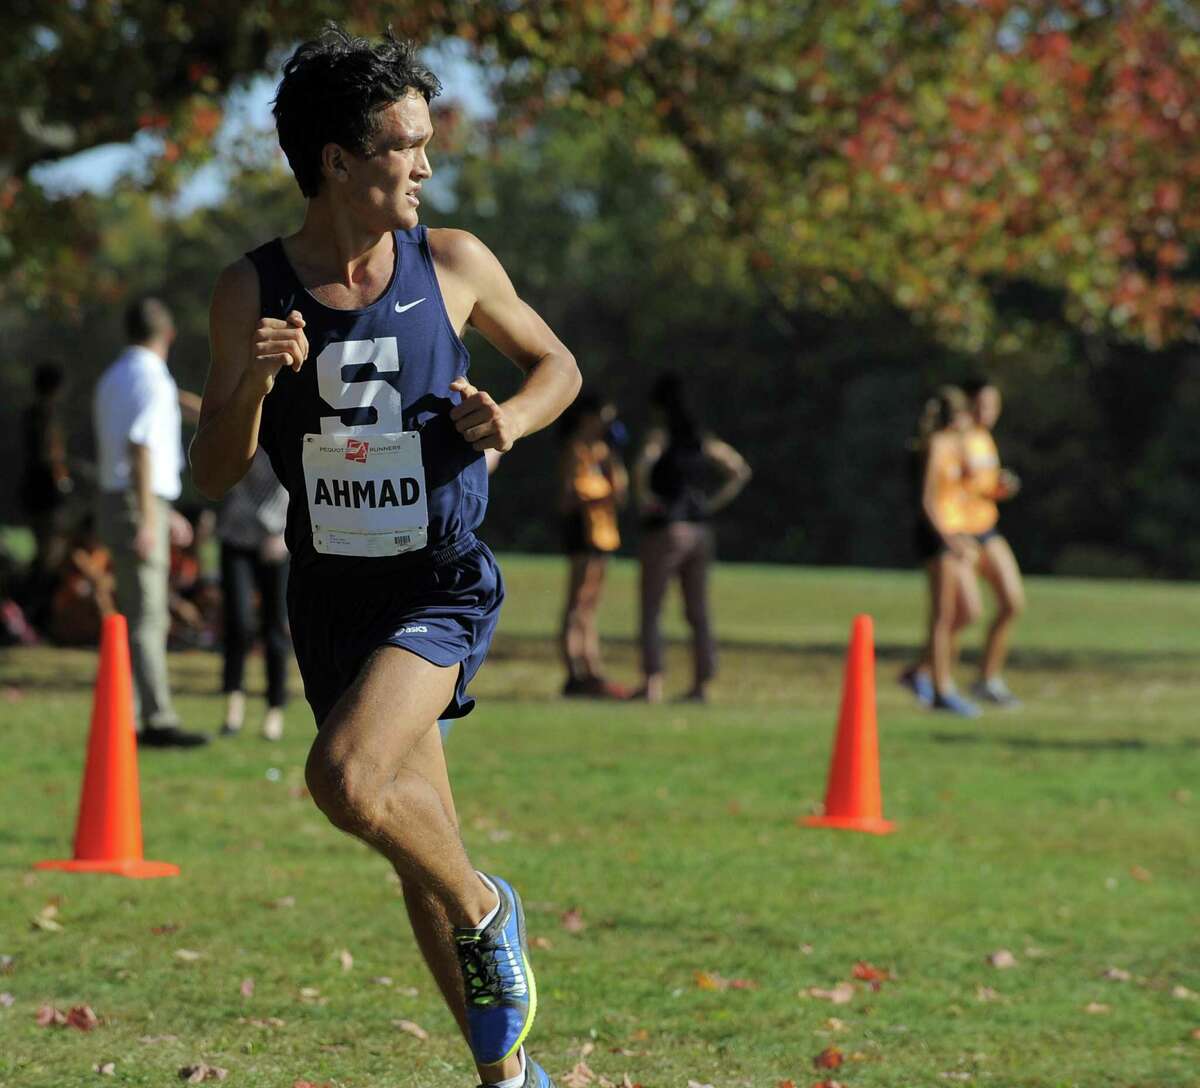 Staples Zakeer Ahmad looks back at the field of competitors on his way to a 1st place finish in the FCIAC Boys Cross Country Championship at Waveny Park in New Canaan, Conn. on Wednesday, Oct. 19 2016. Ahmad finished with a time of 15:49.42.